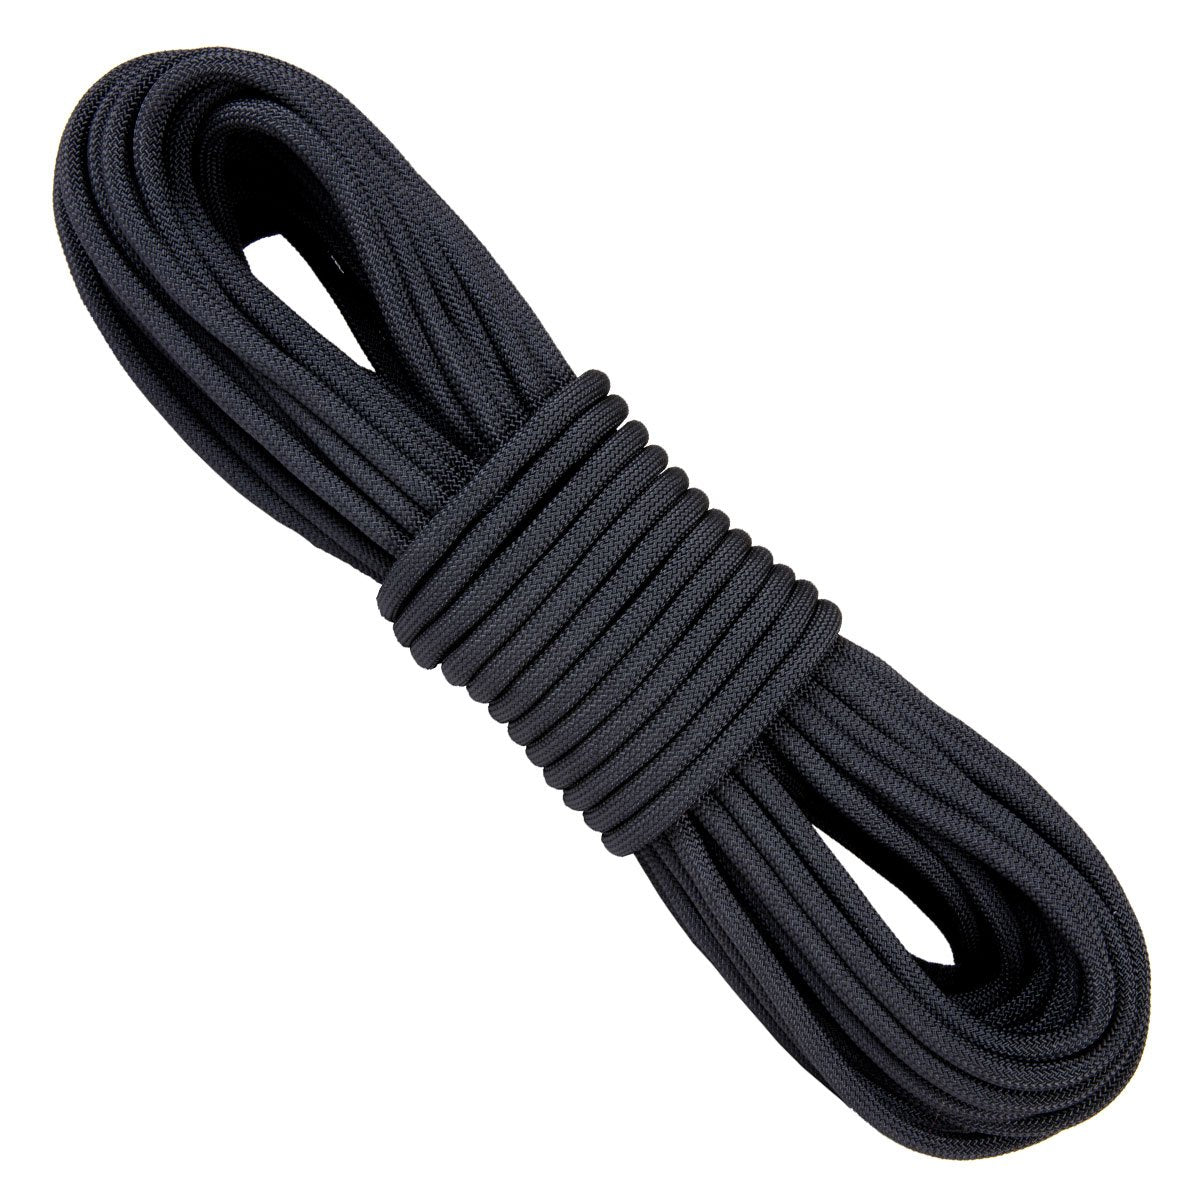 PARACORD PLANET Nylon Military Paracord 550 lbs Type III 7 Strand Utility  Cord Rope USA Made 